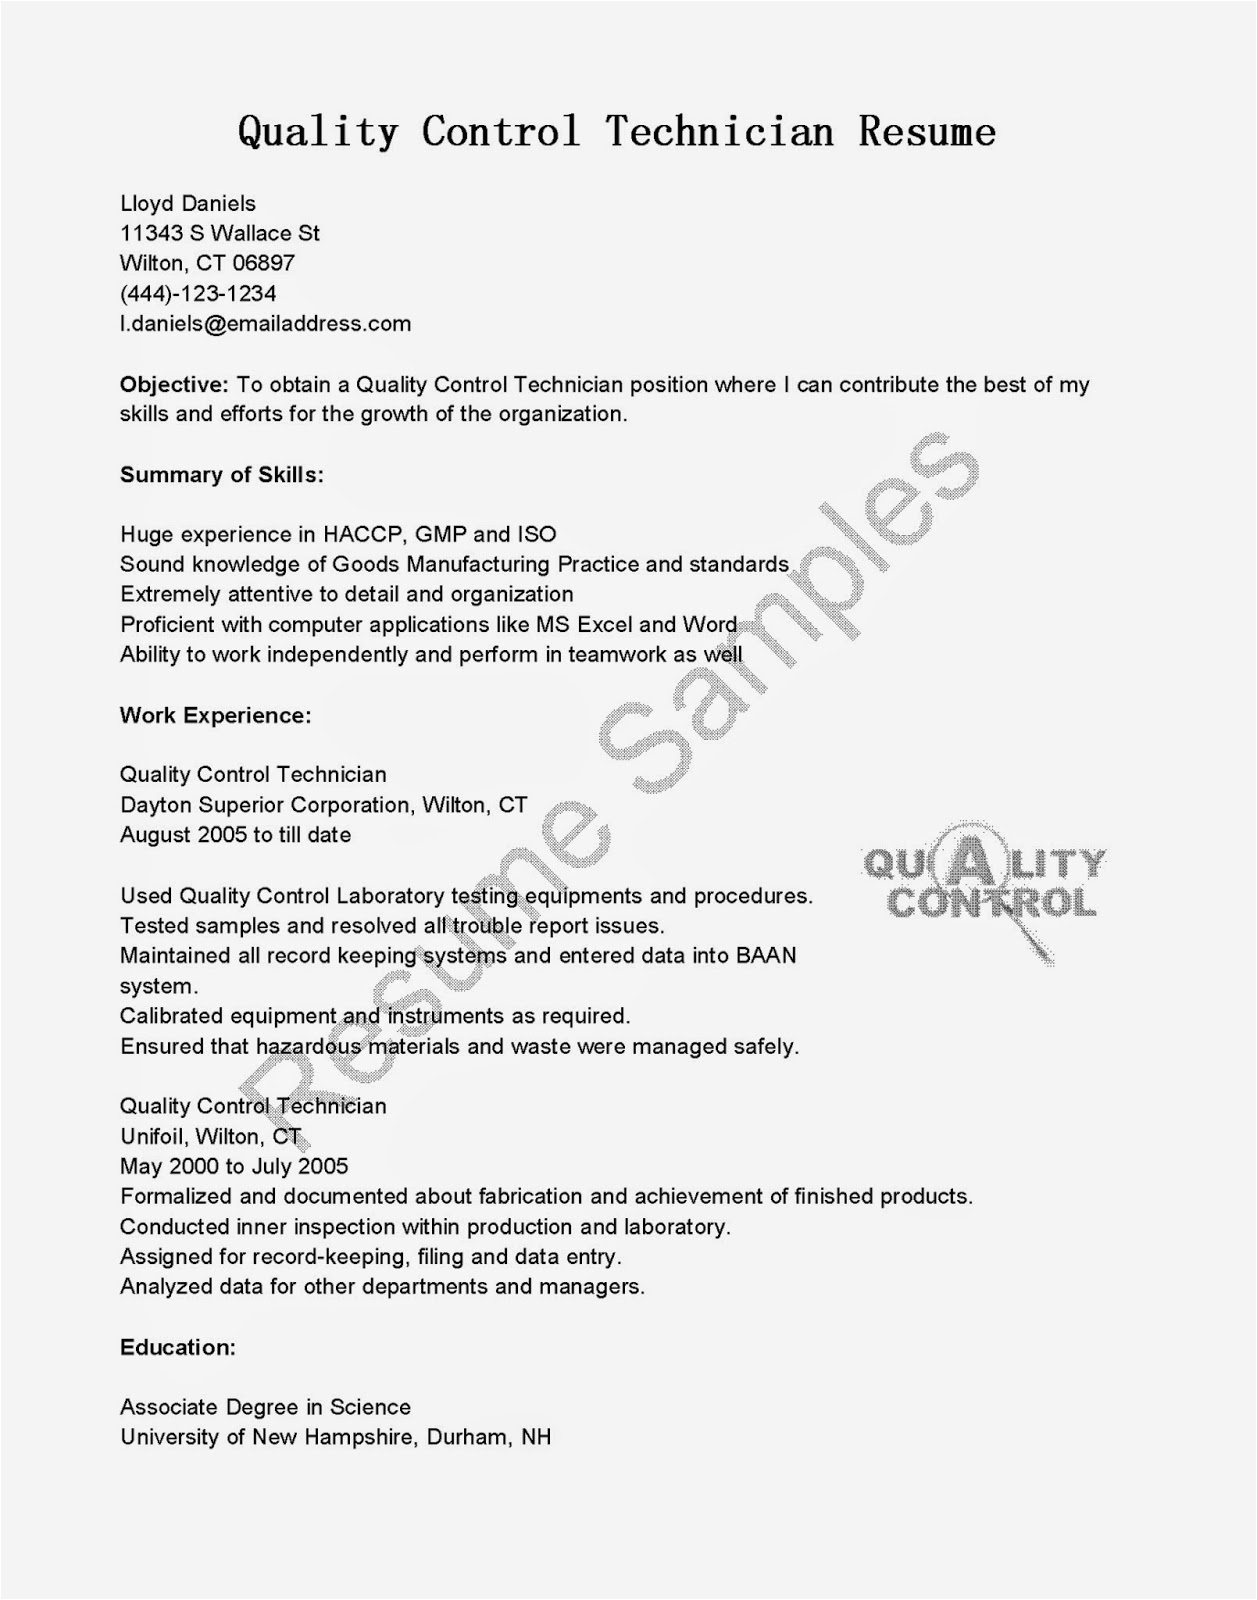 Sample Resume for Quality Control Technician Resume Samples Quality Control Technician Resume Sample